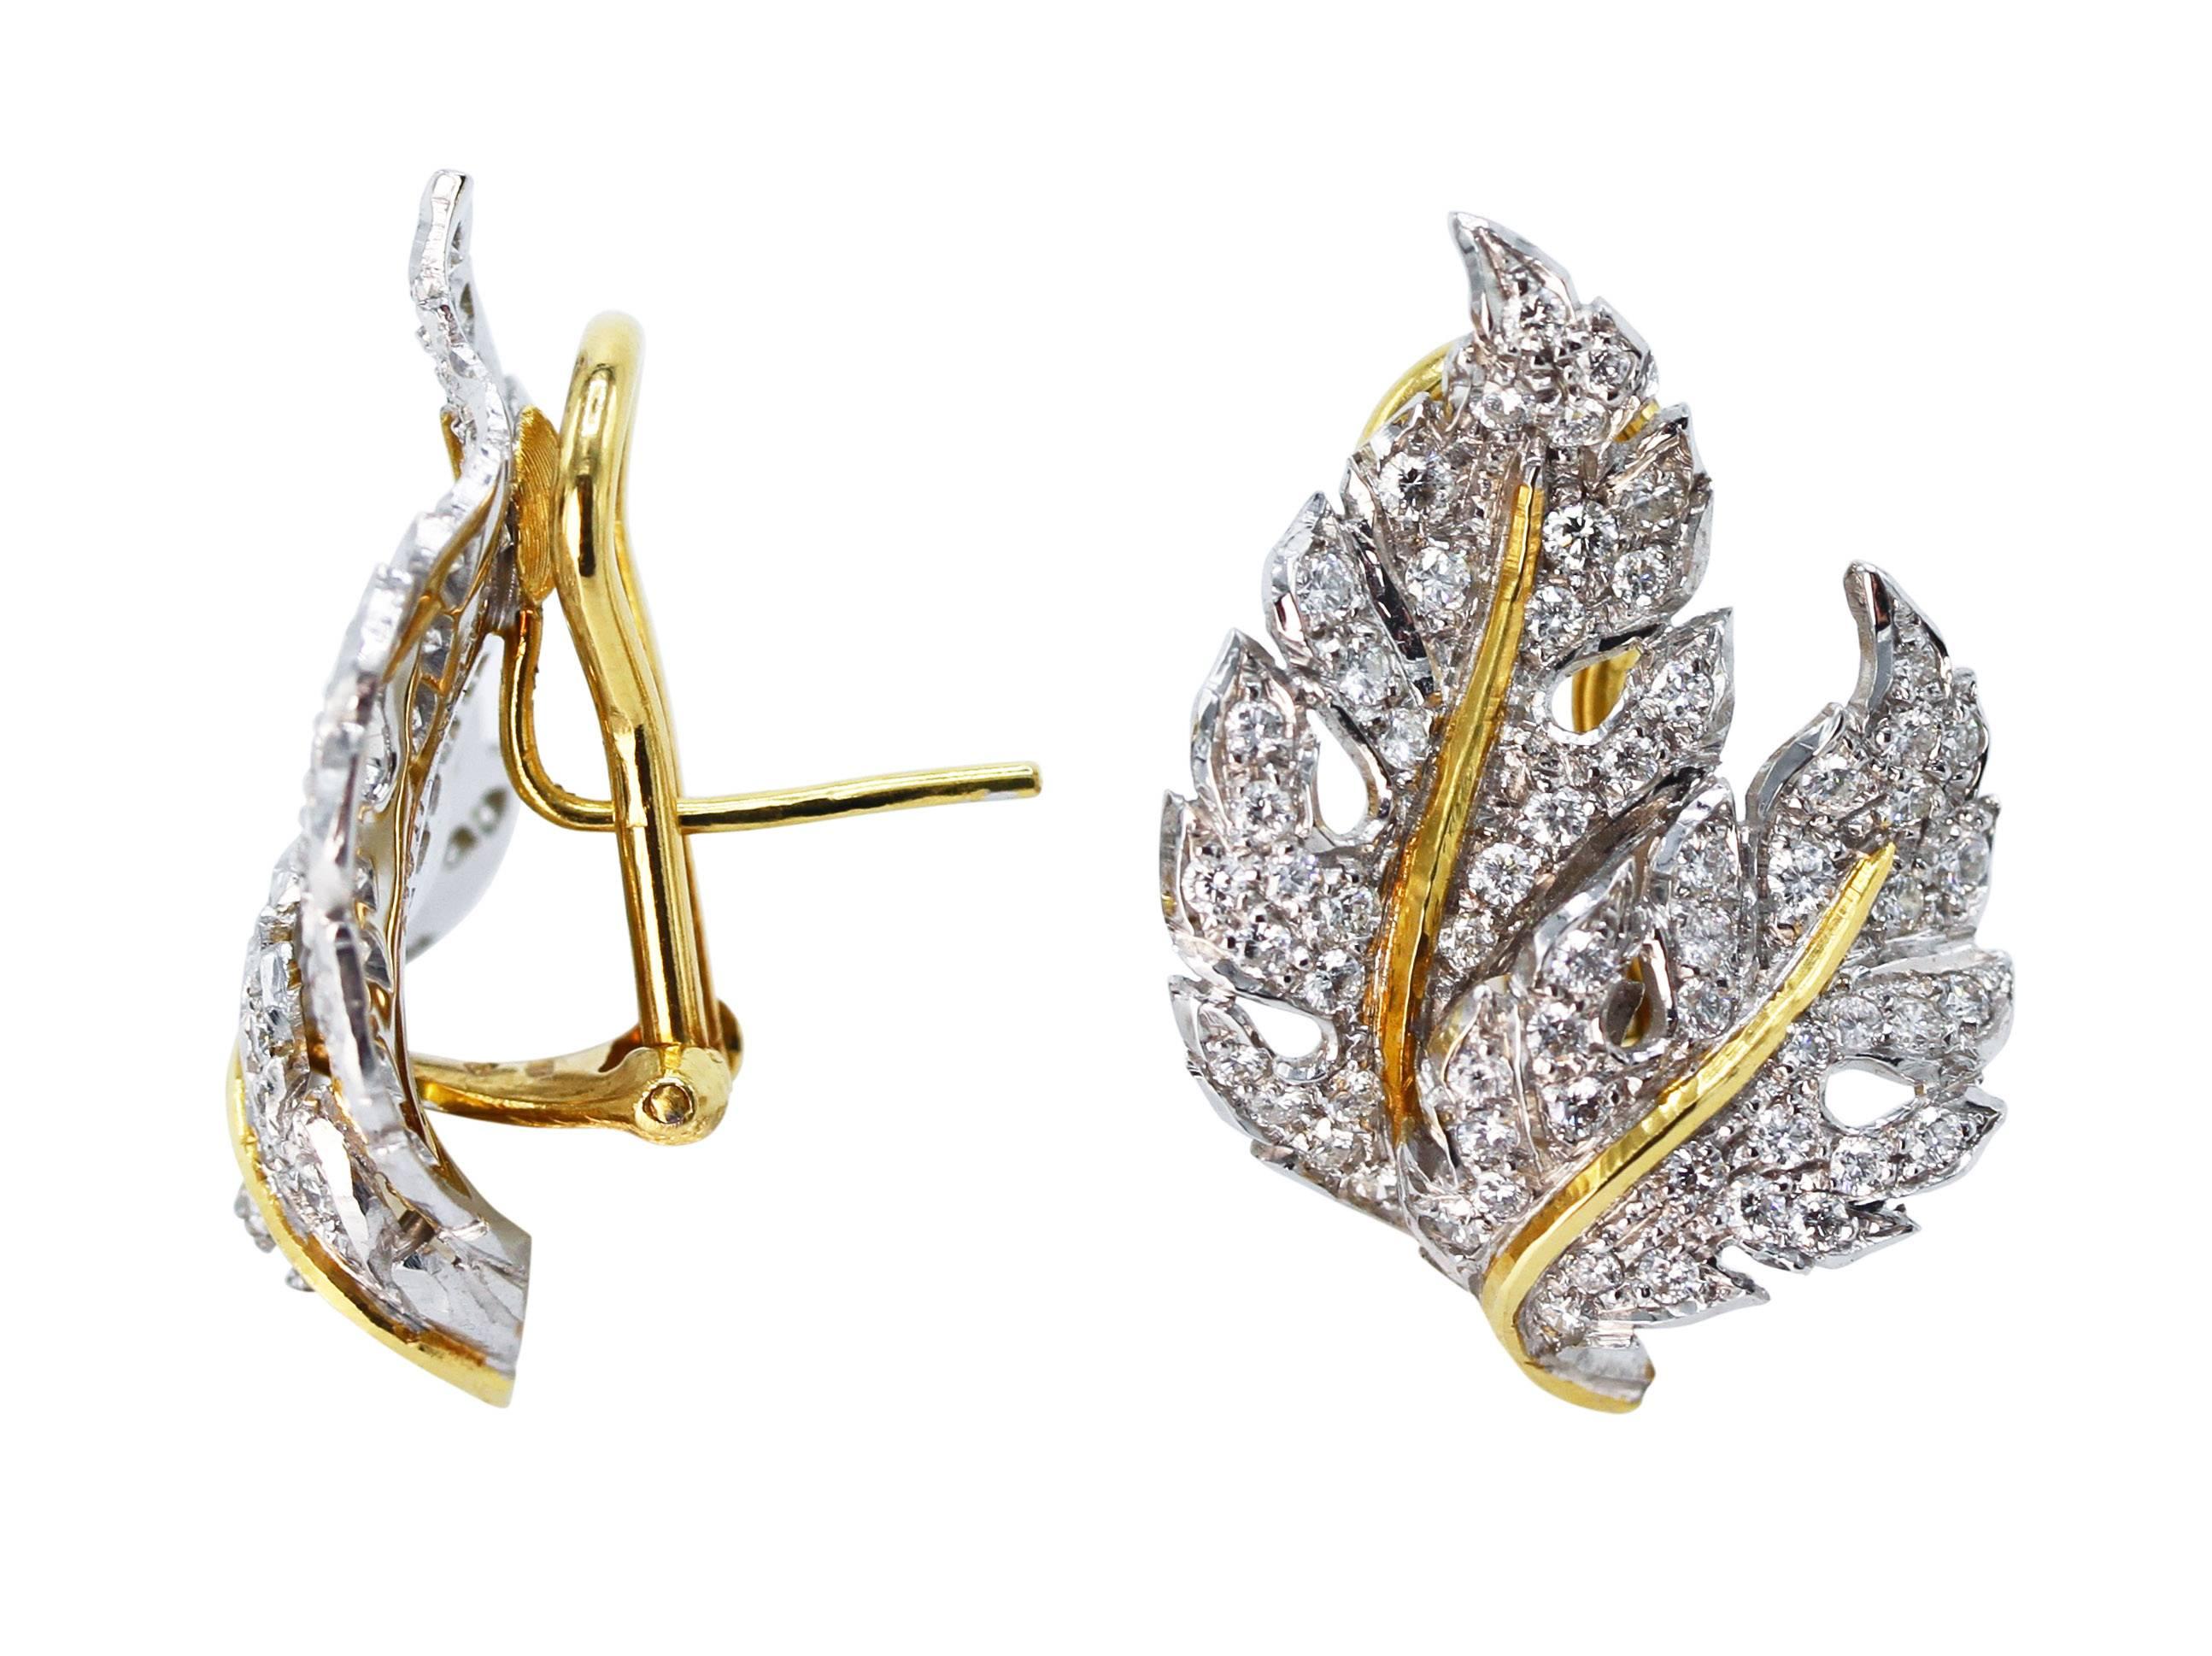 Pair of 18 Karat Yellow and White Gold and Diamond Leaf Earclips by Buccellati, Italy
• Signed M. Buccellati, Italy
• 122 round diamonds weighing 1.80 carats
• Measuring 1 by 1 1/8 inches, gross weight 12.6 grams